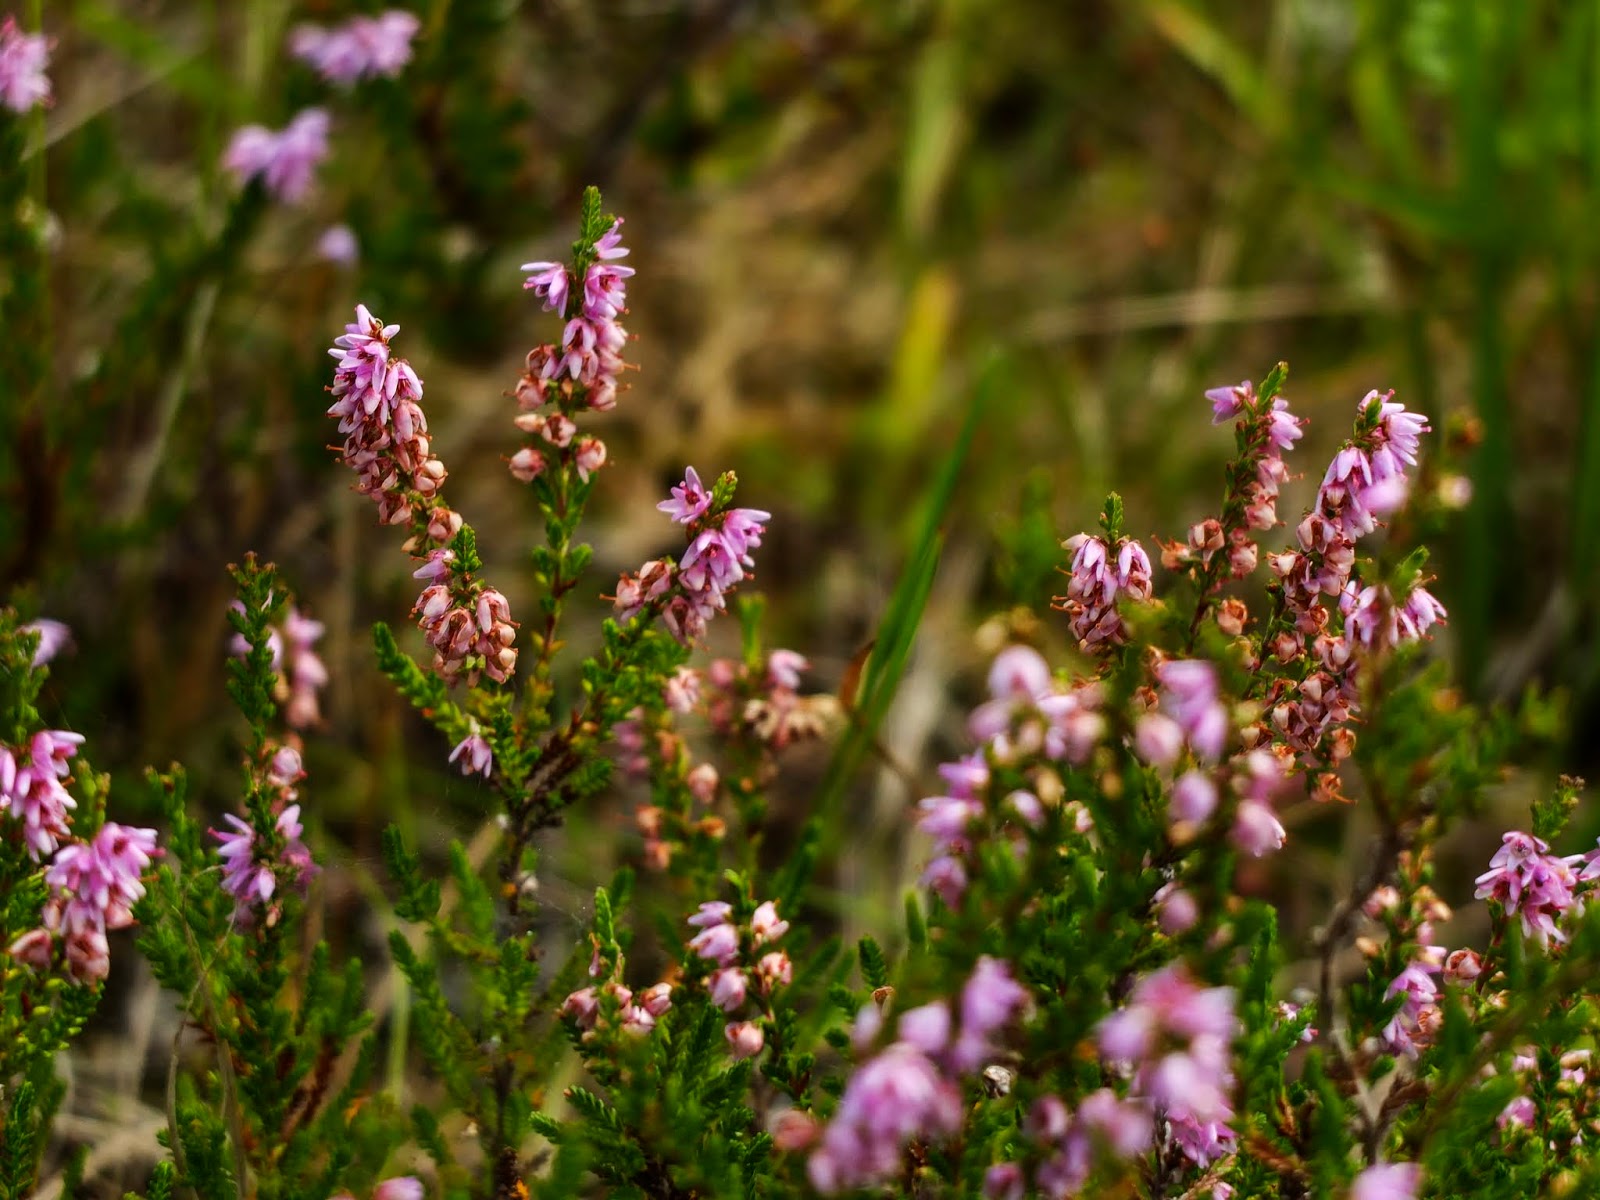 A pink heather plant.